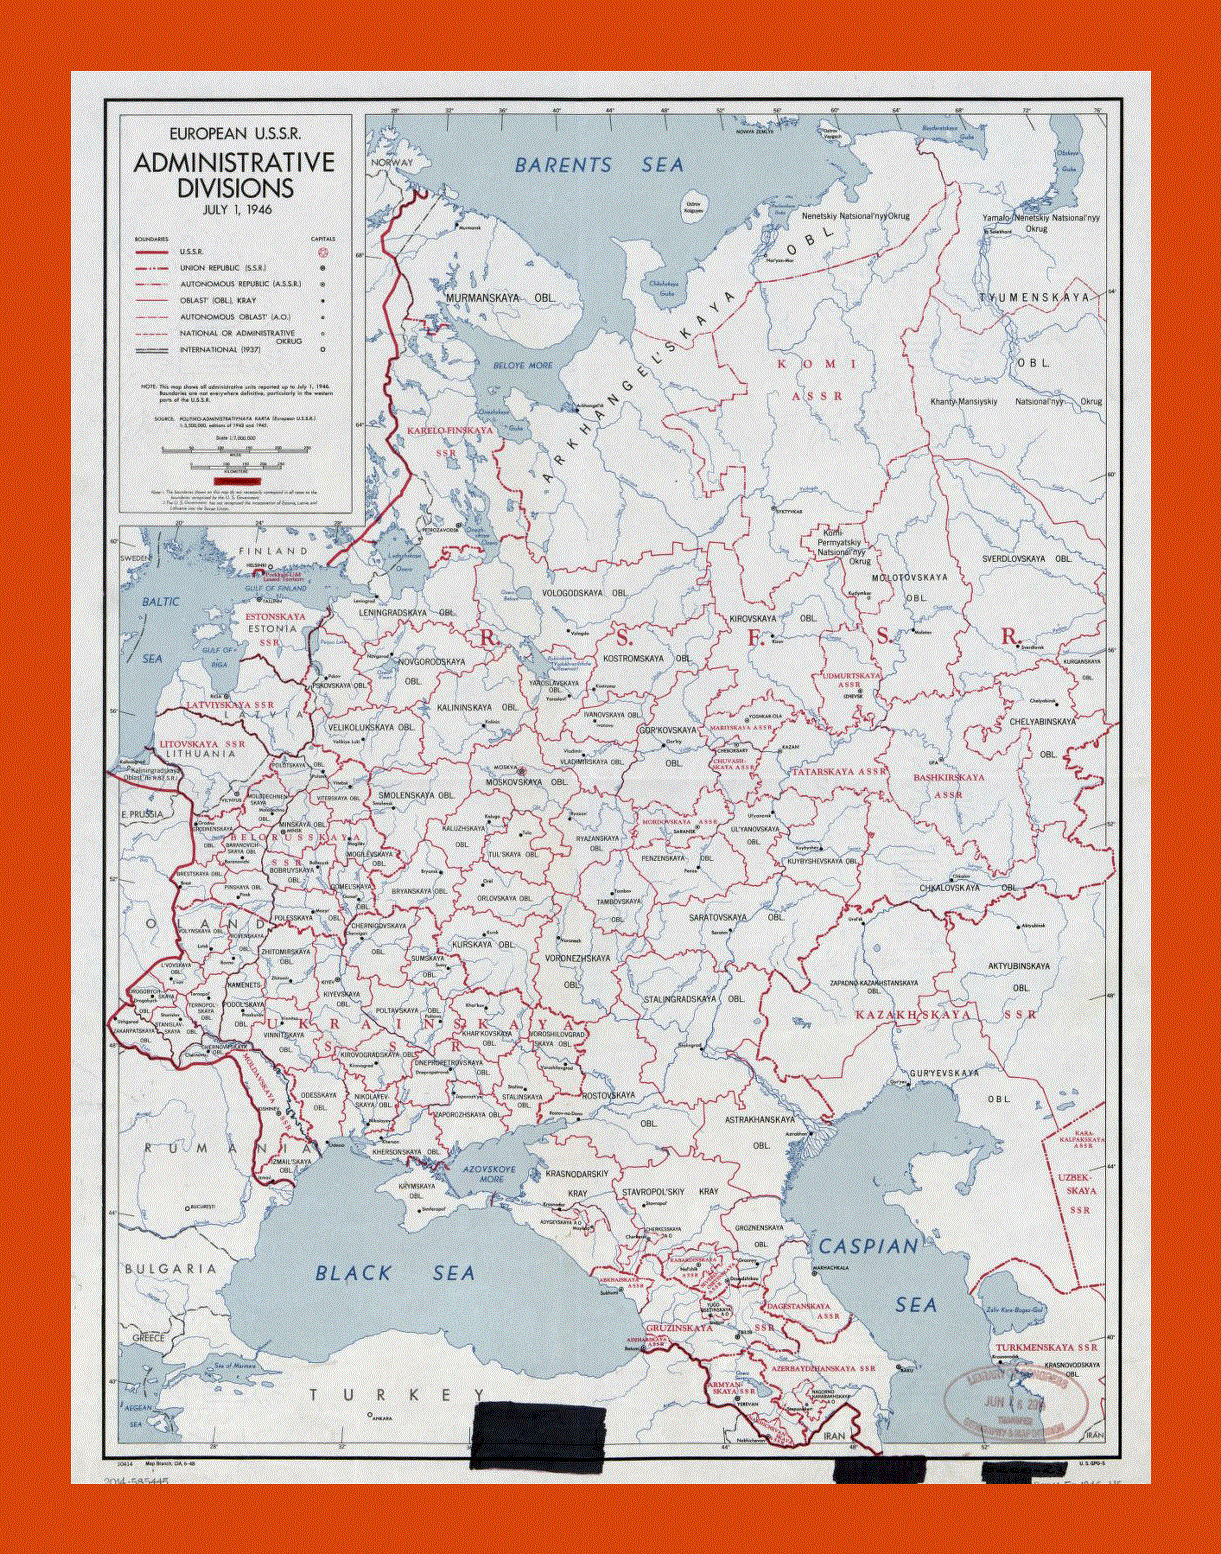 Old administrative divisions map of European U.S.S.R. - 1946